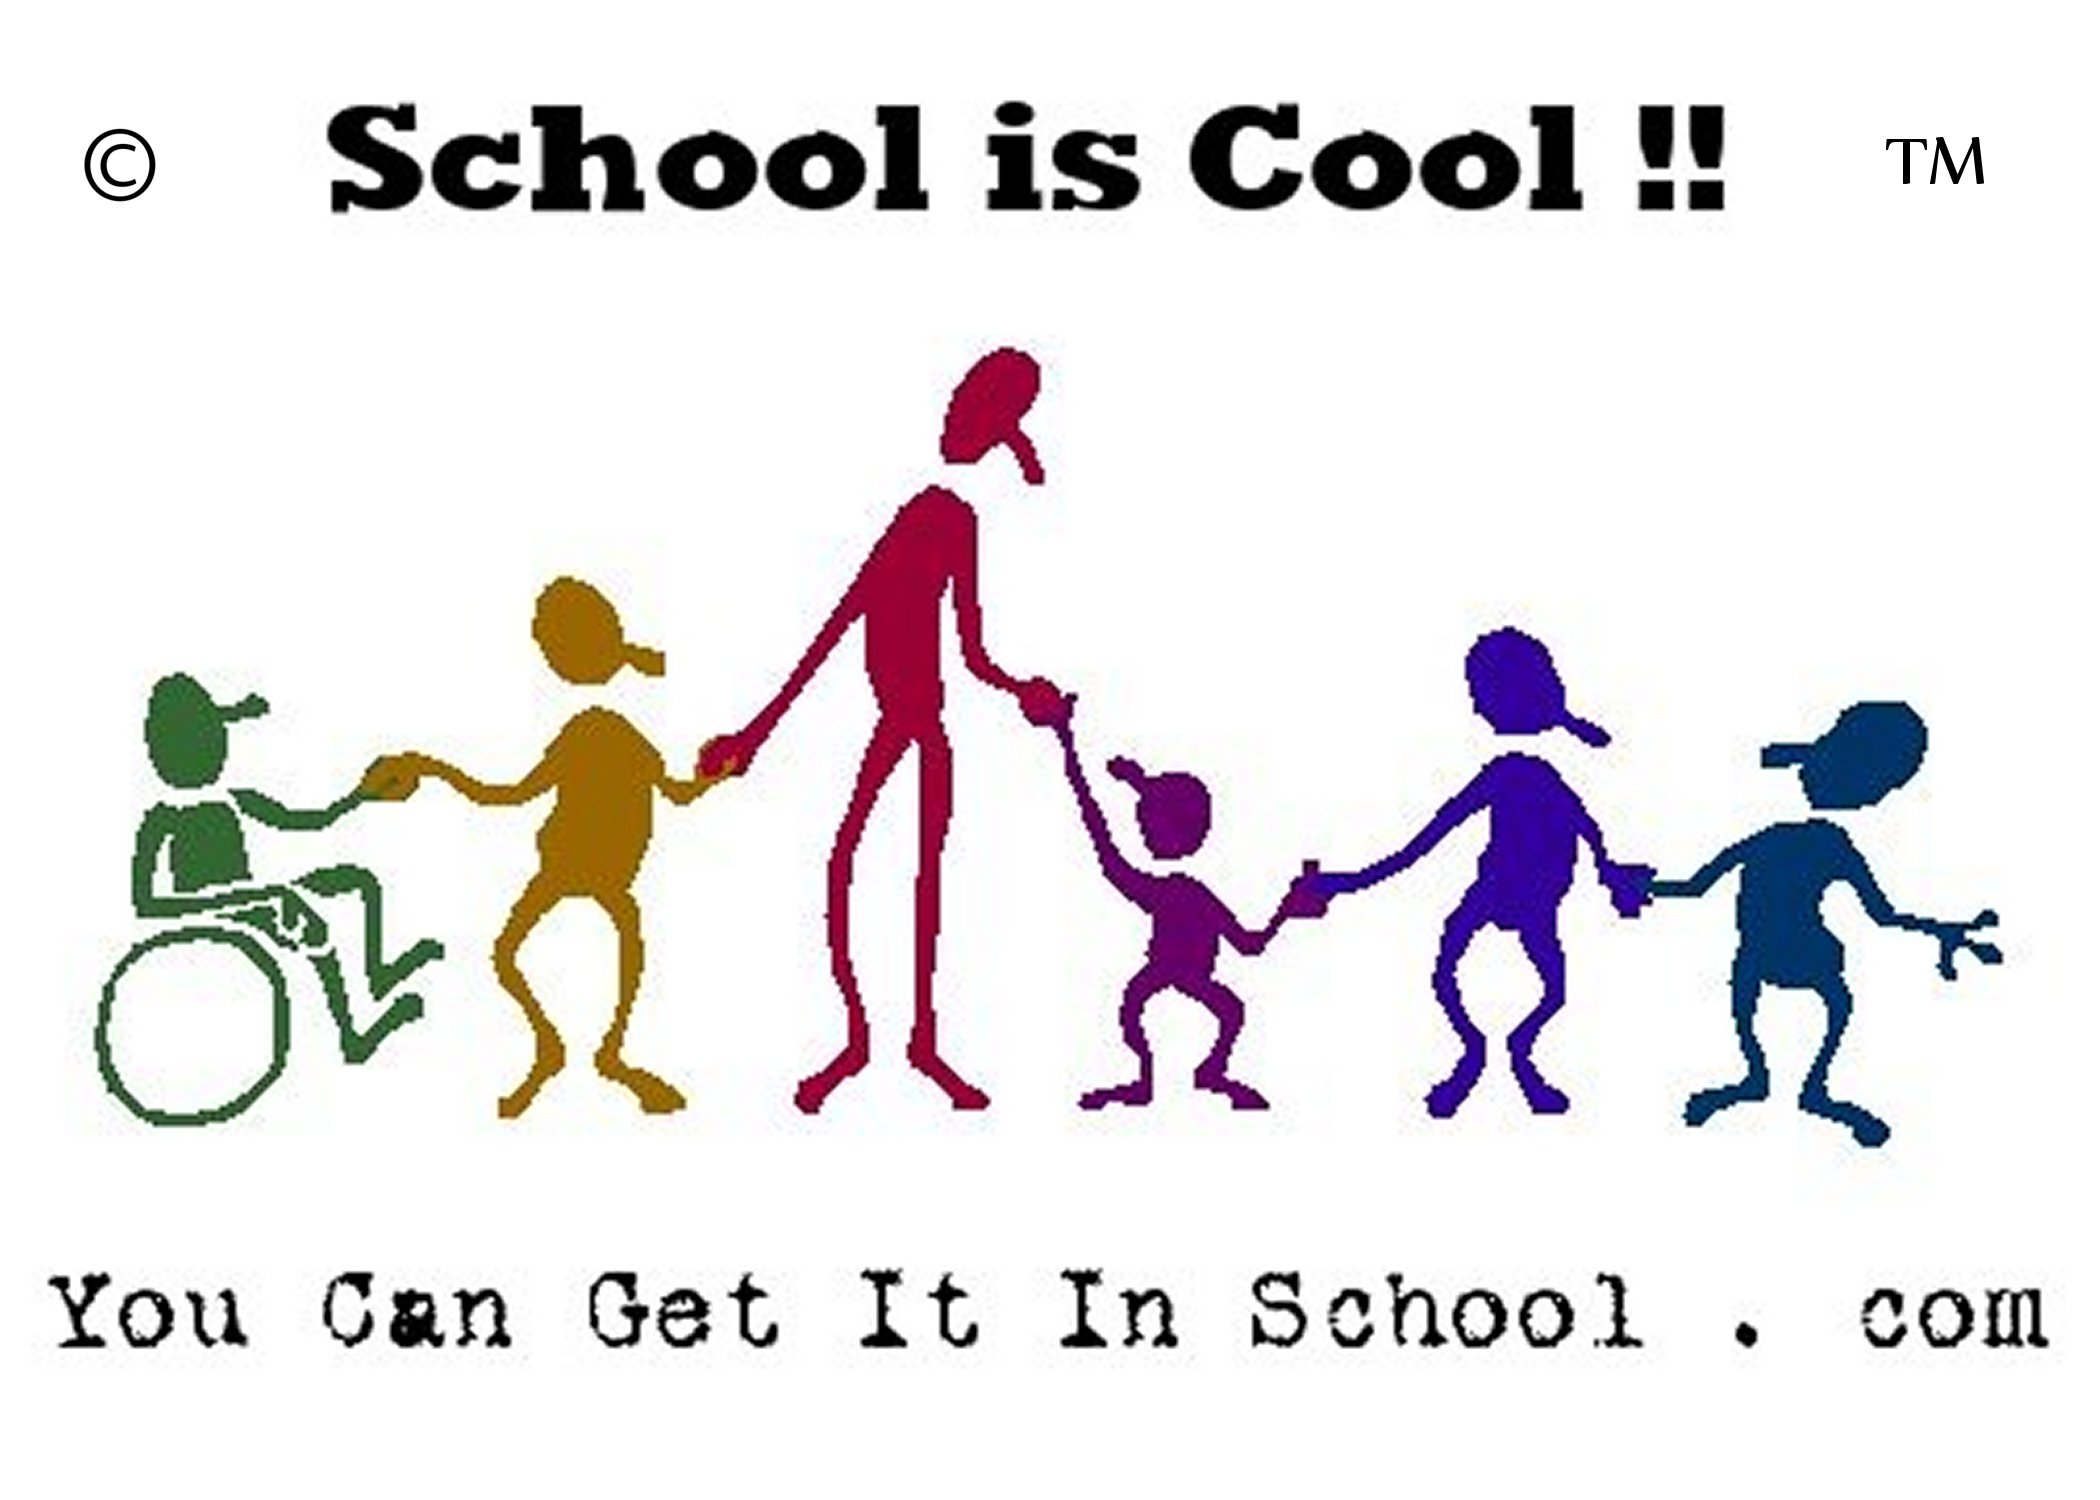 School is Cool Campaign Headquaters